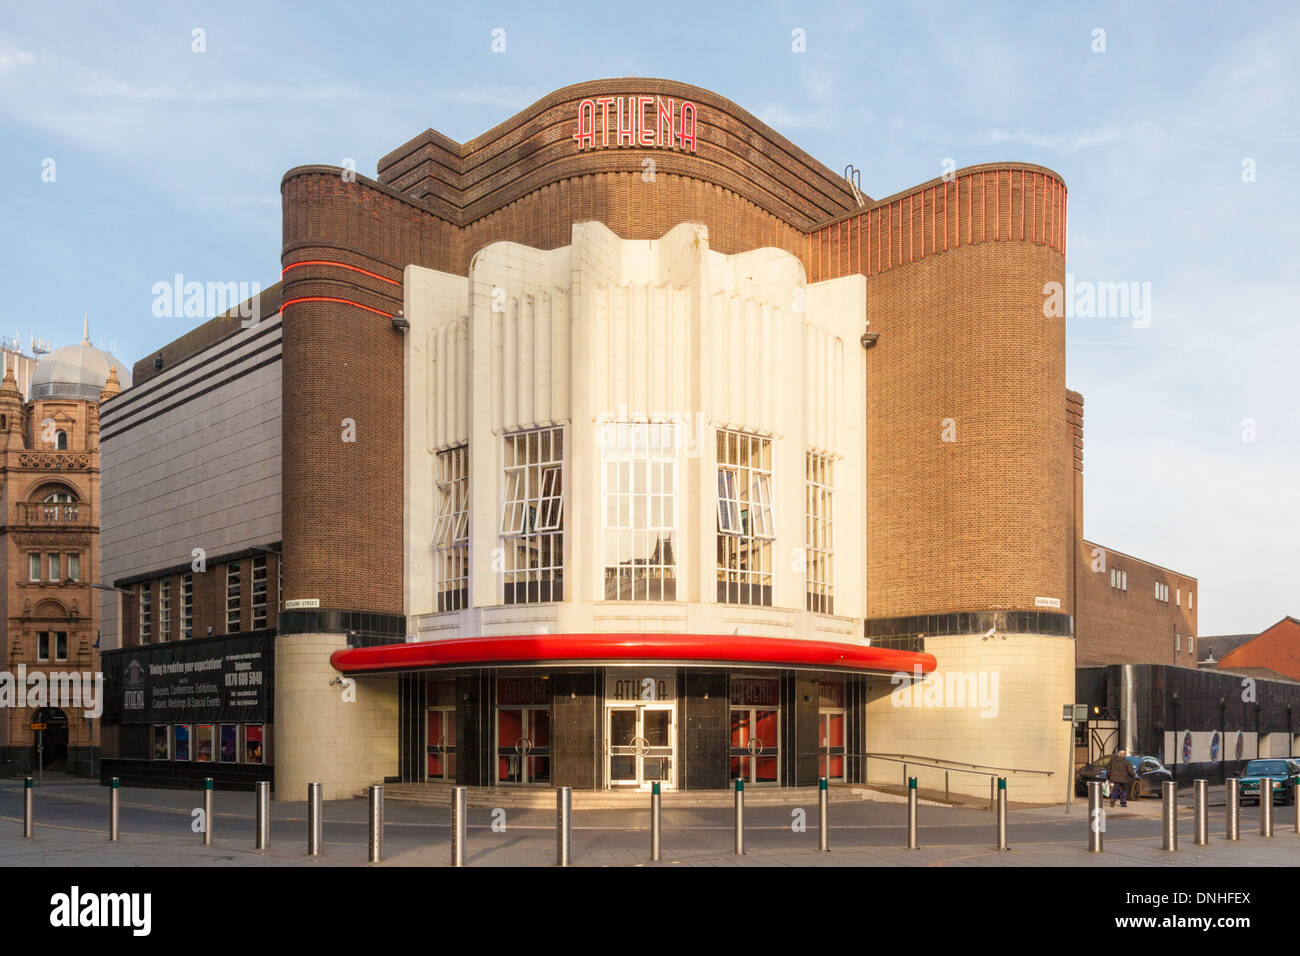 Athena, Leicester, England, UK, designed in the Streamline Moderne style. Stock Photo